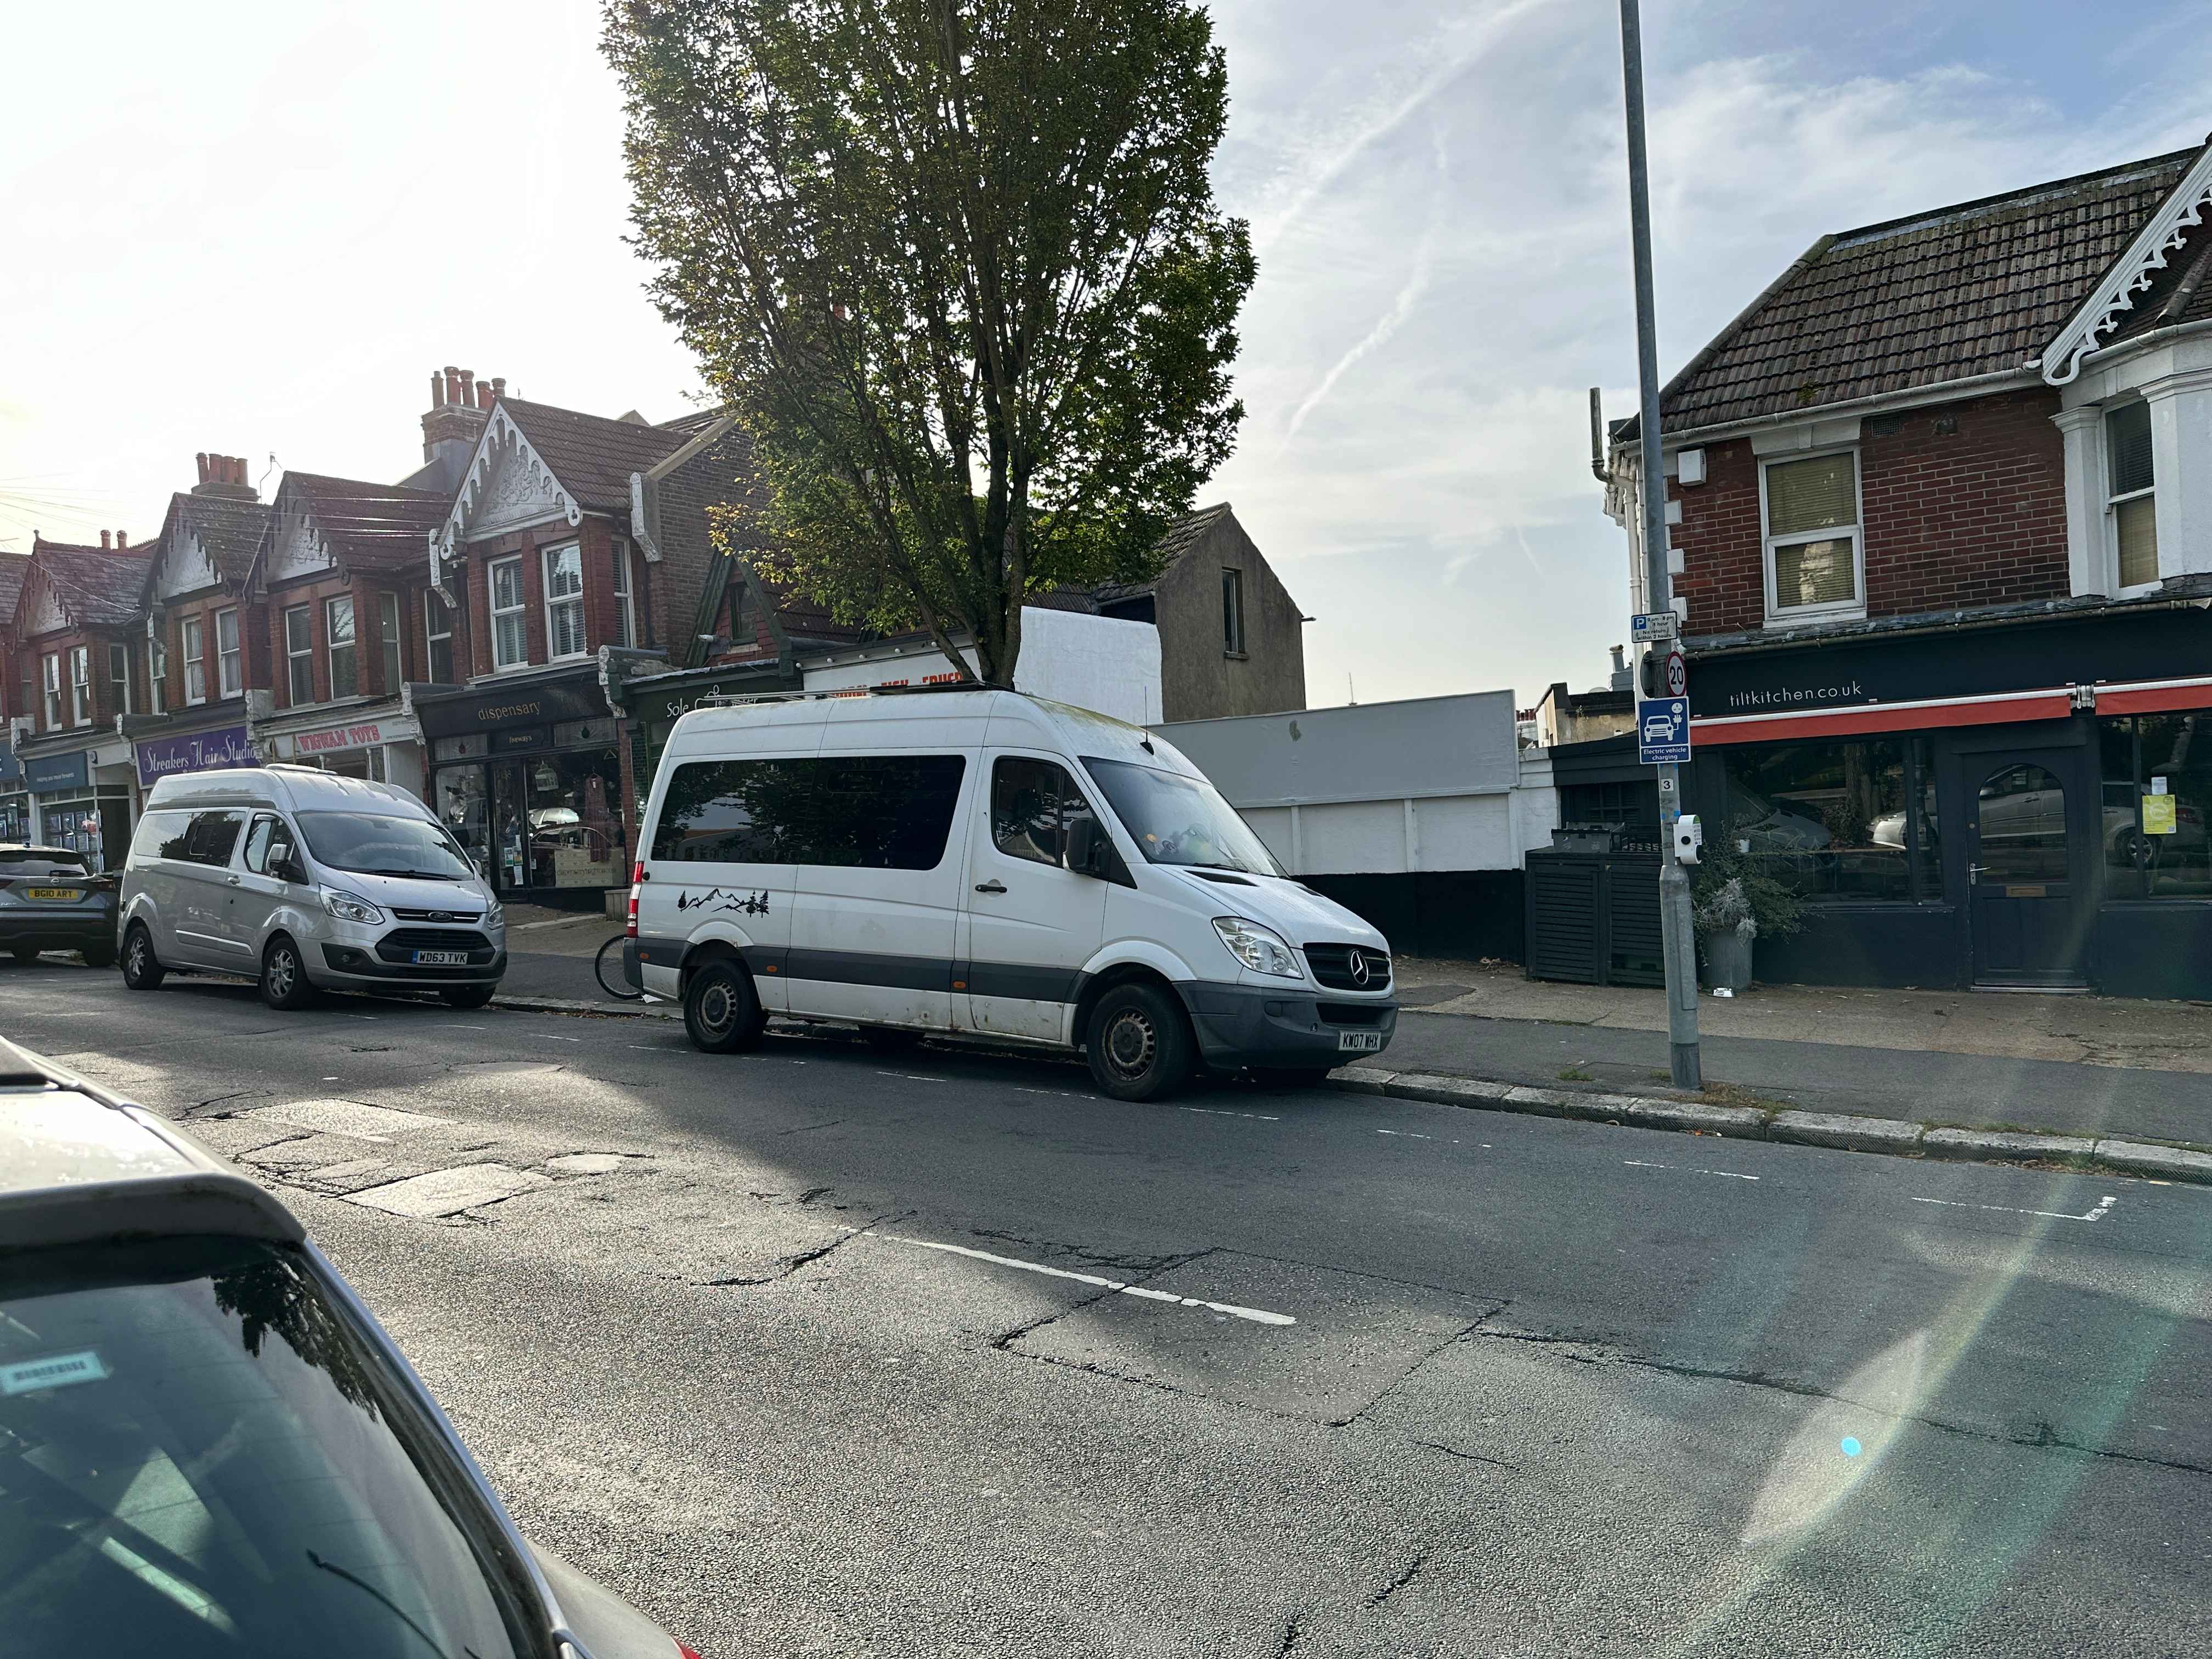 Photograph of KW07 WHX - a White Mercedes Sprinter camper van parked in Hollingdean by a non-resident. The first of four photographs supplied by the residents of Hollingdean.